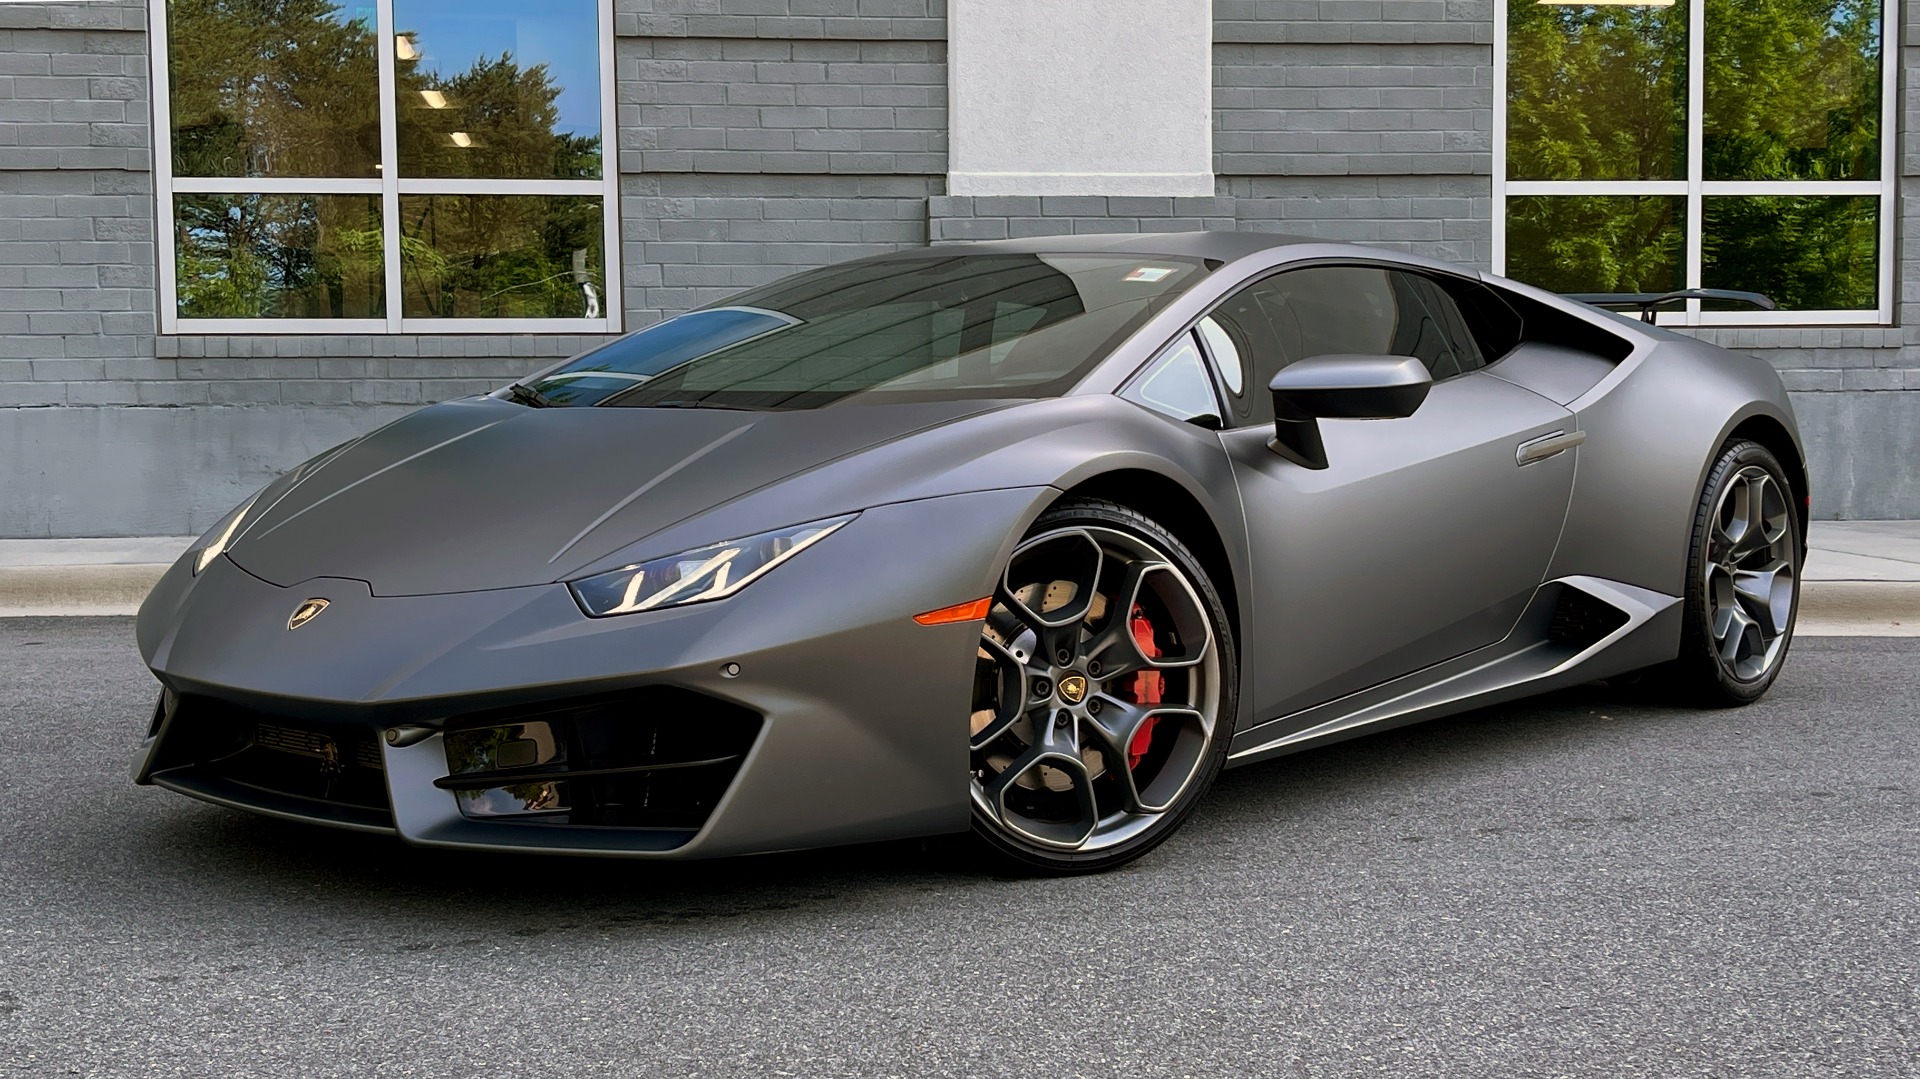 Used 2019 Lamborghini HURACAN LP 580-2 / 5.2L V10 (571HP) / 7-SPD AUTO / RWD / REARVIEW for sale $254,999 at Formula Imports in Charlotte NC 28227 1